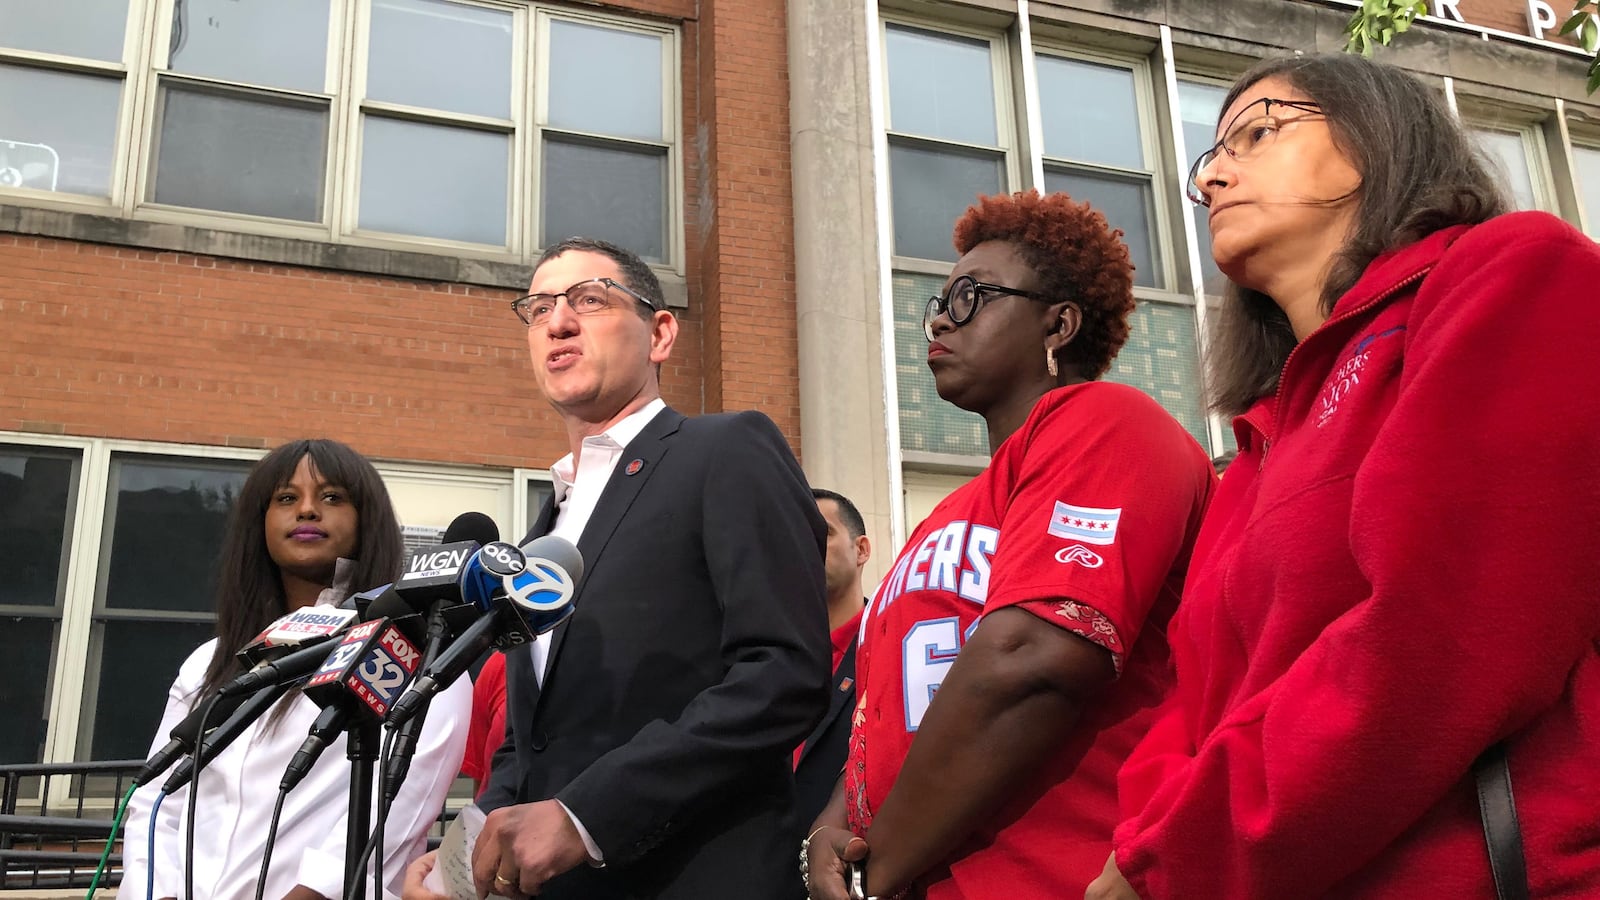 Jesse Sharkey, president of the Chicago Teachers Union, spoke in August 2019 at a press conference after the union rejected a neutral fact-finder's proposal, officially launching a countdown to a strike.